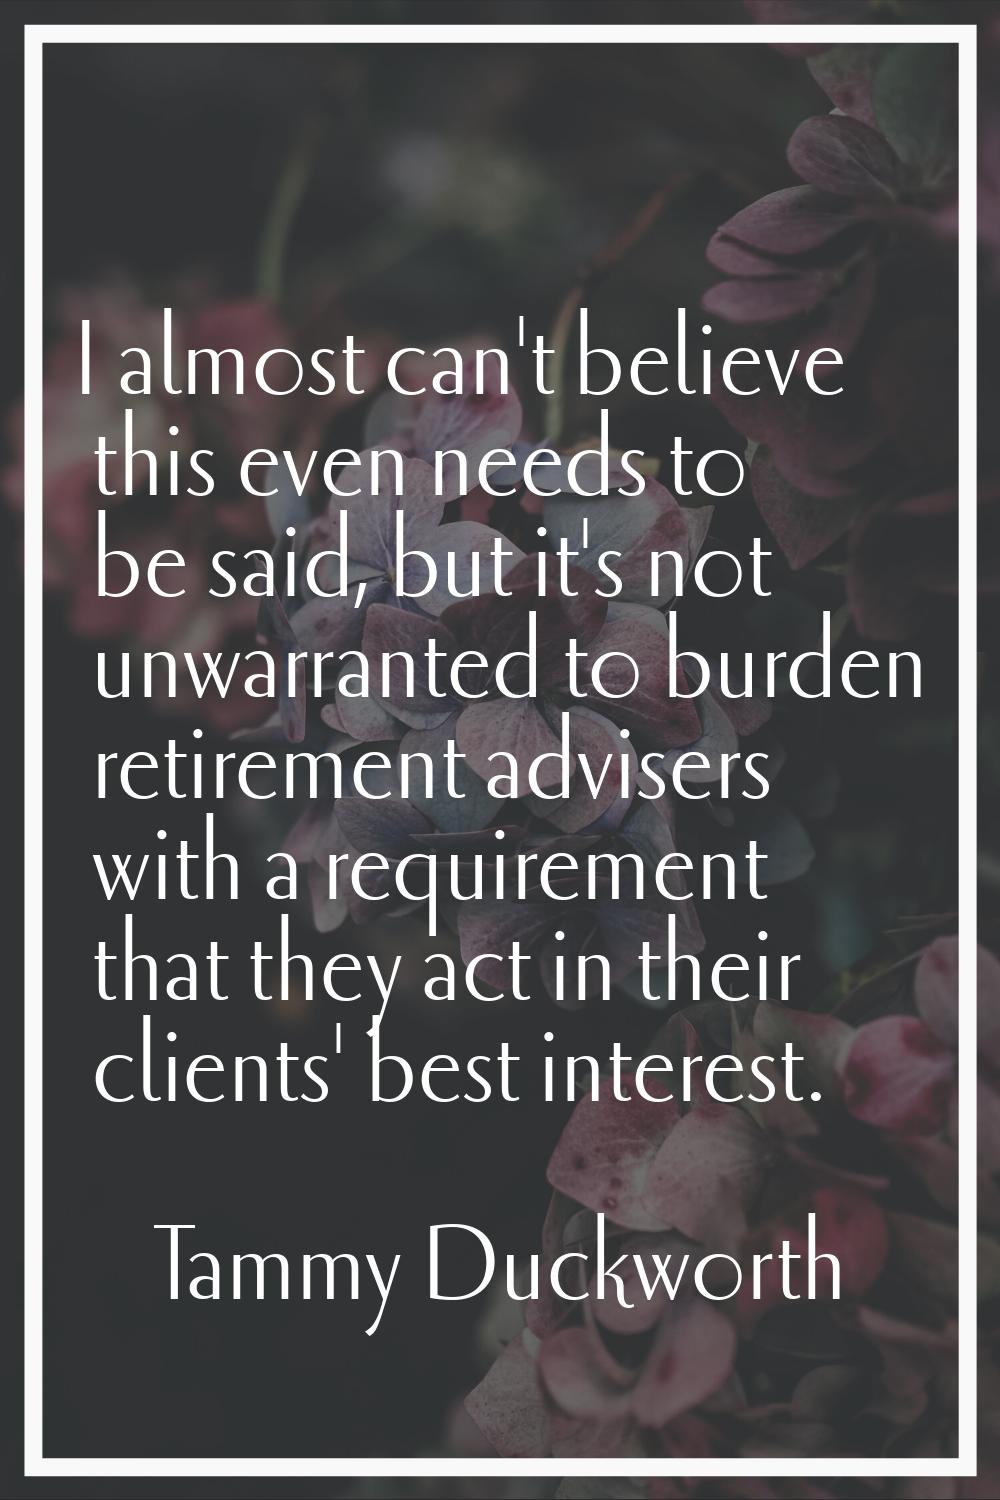 I almost can't believe this even needs to be said, but it's not unwarranted to burden retirement ad